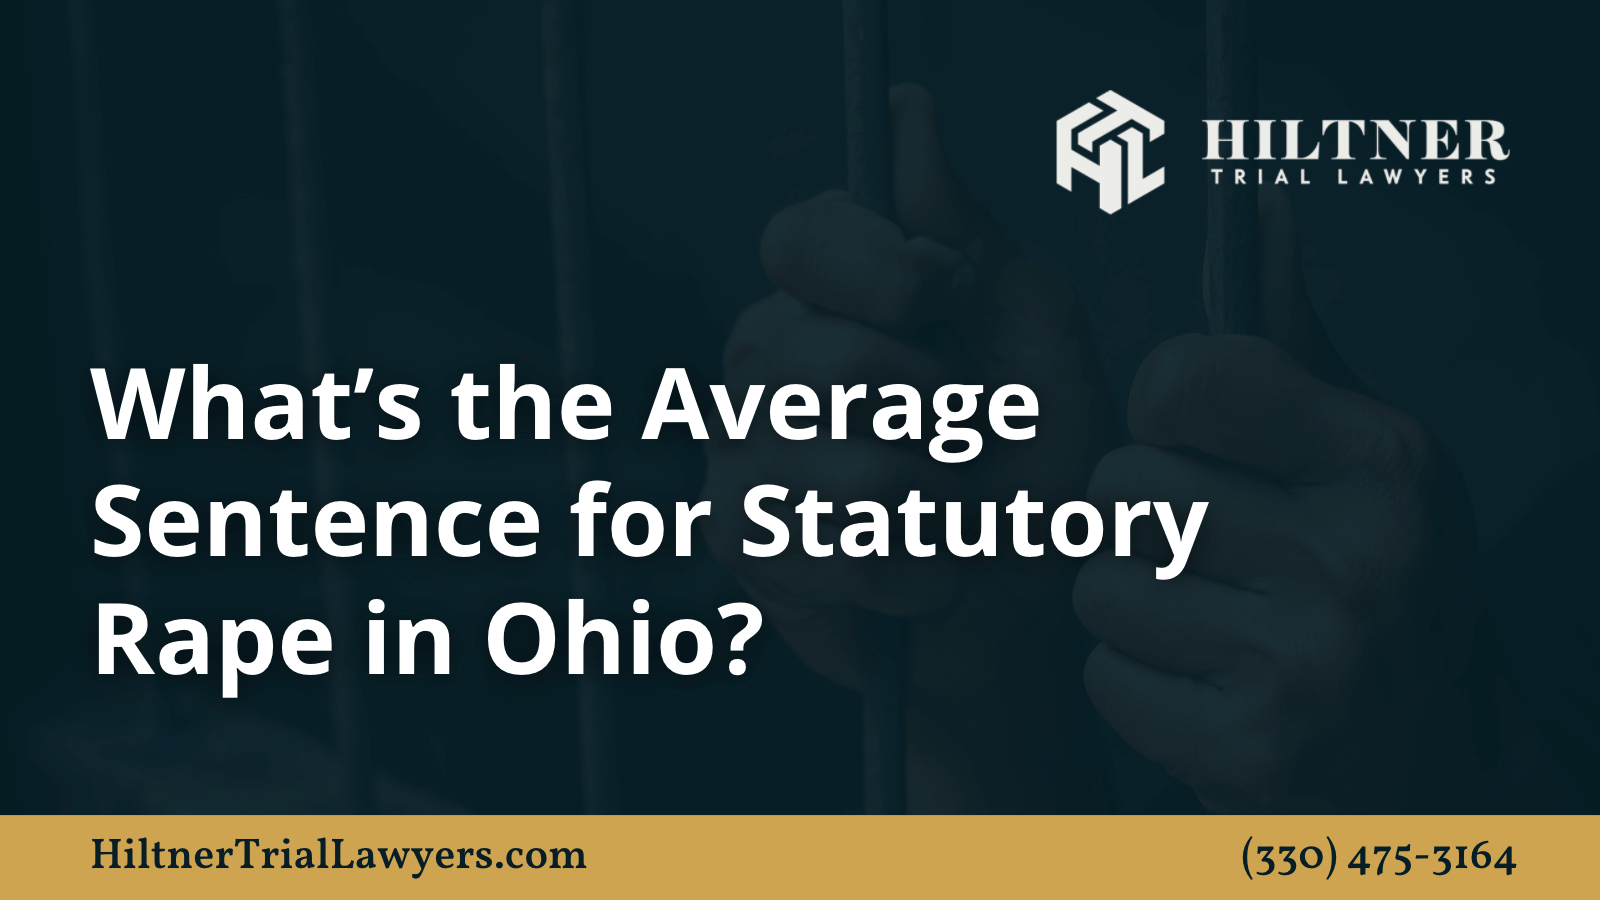 What’s the Average Sentence for Statutory Rape in Ohio - Hiltner Trial Lawyers Ohio - max hiltner